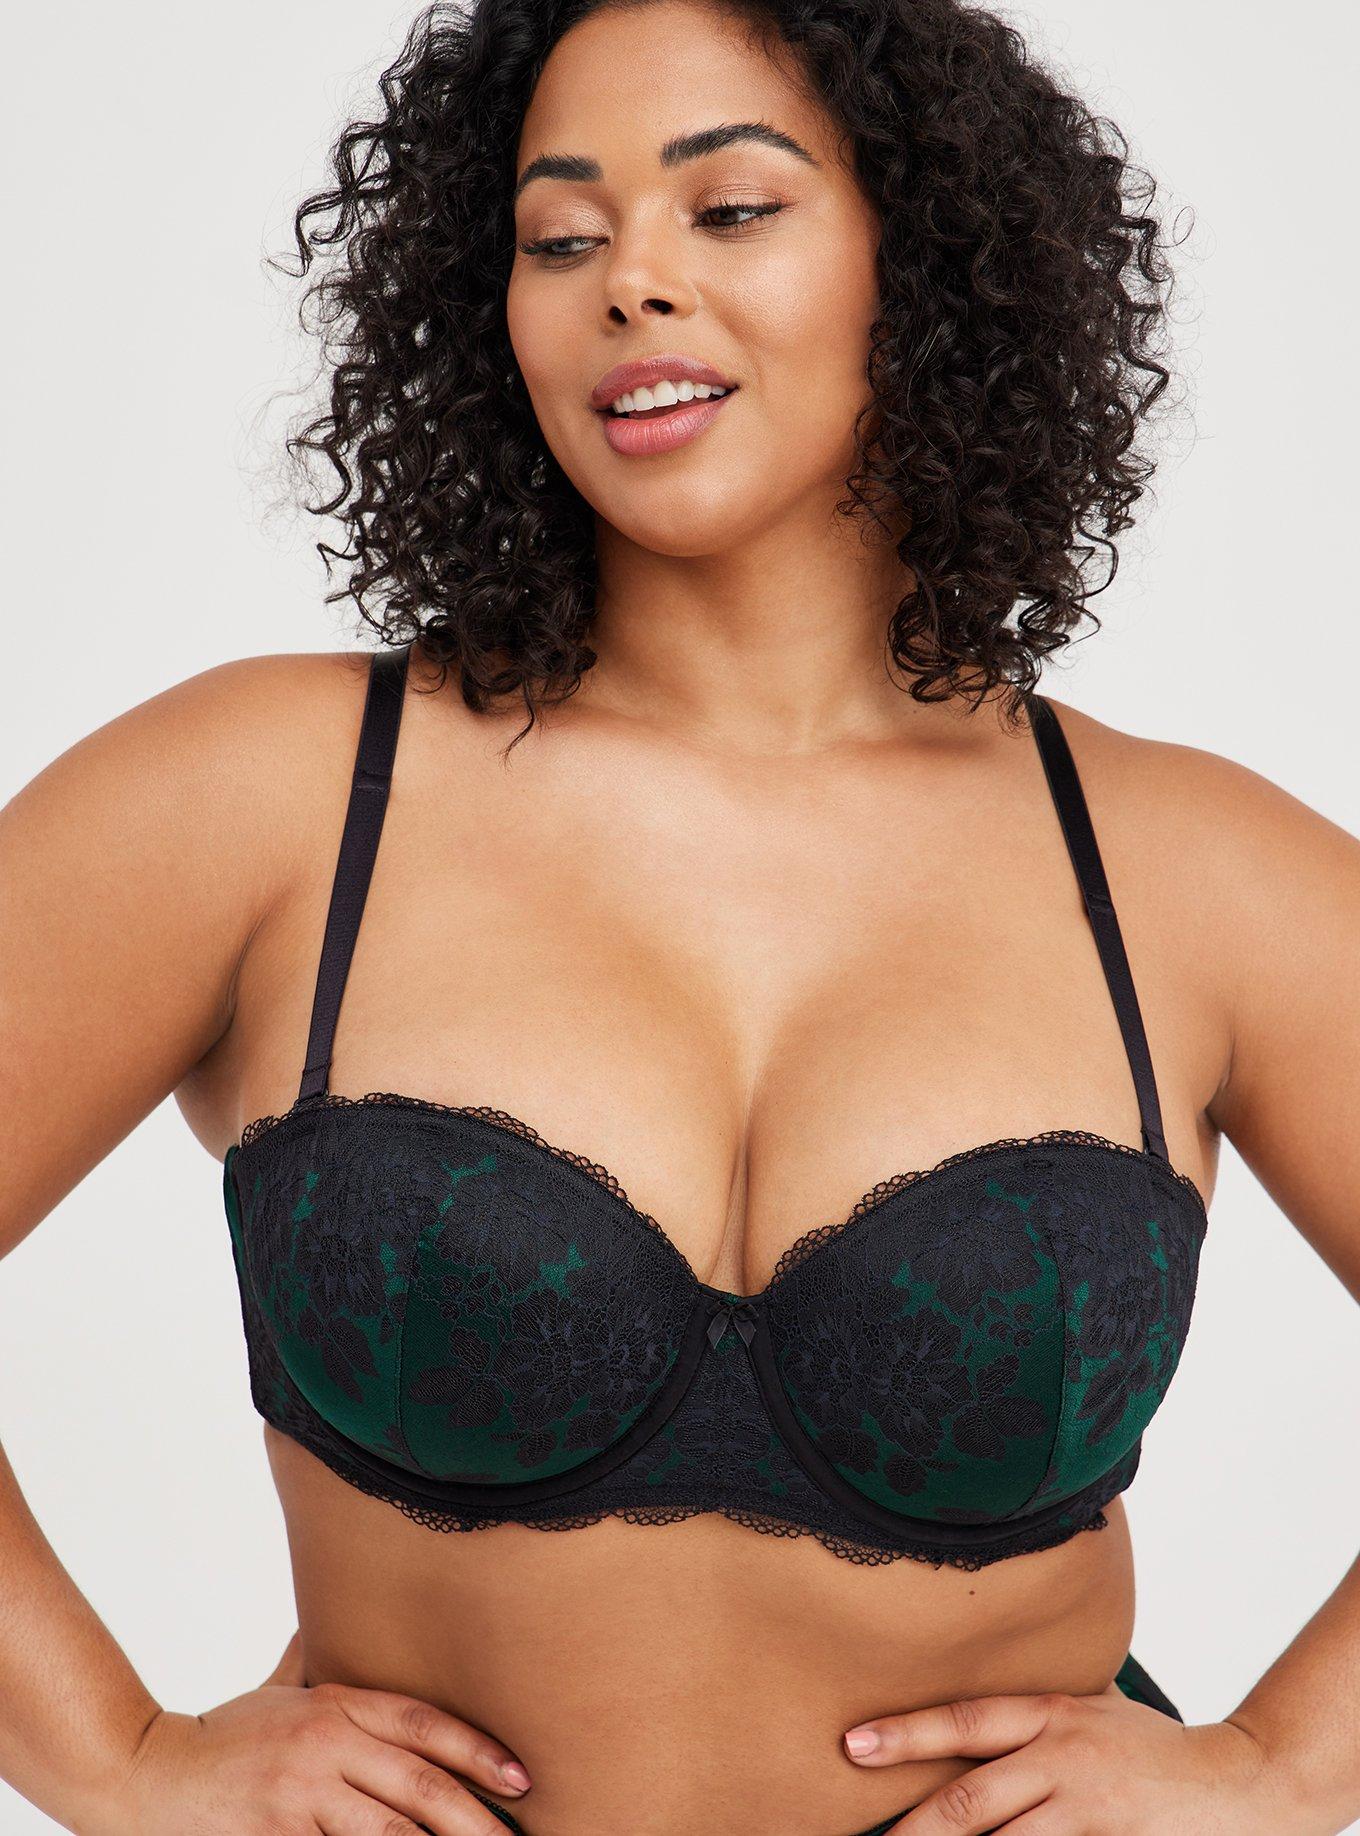 SUPER 2 SIZE PUSH UP BRA BOMBSHELL CUP A, VERY COMPARABLE WITH VS BRA.